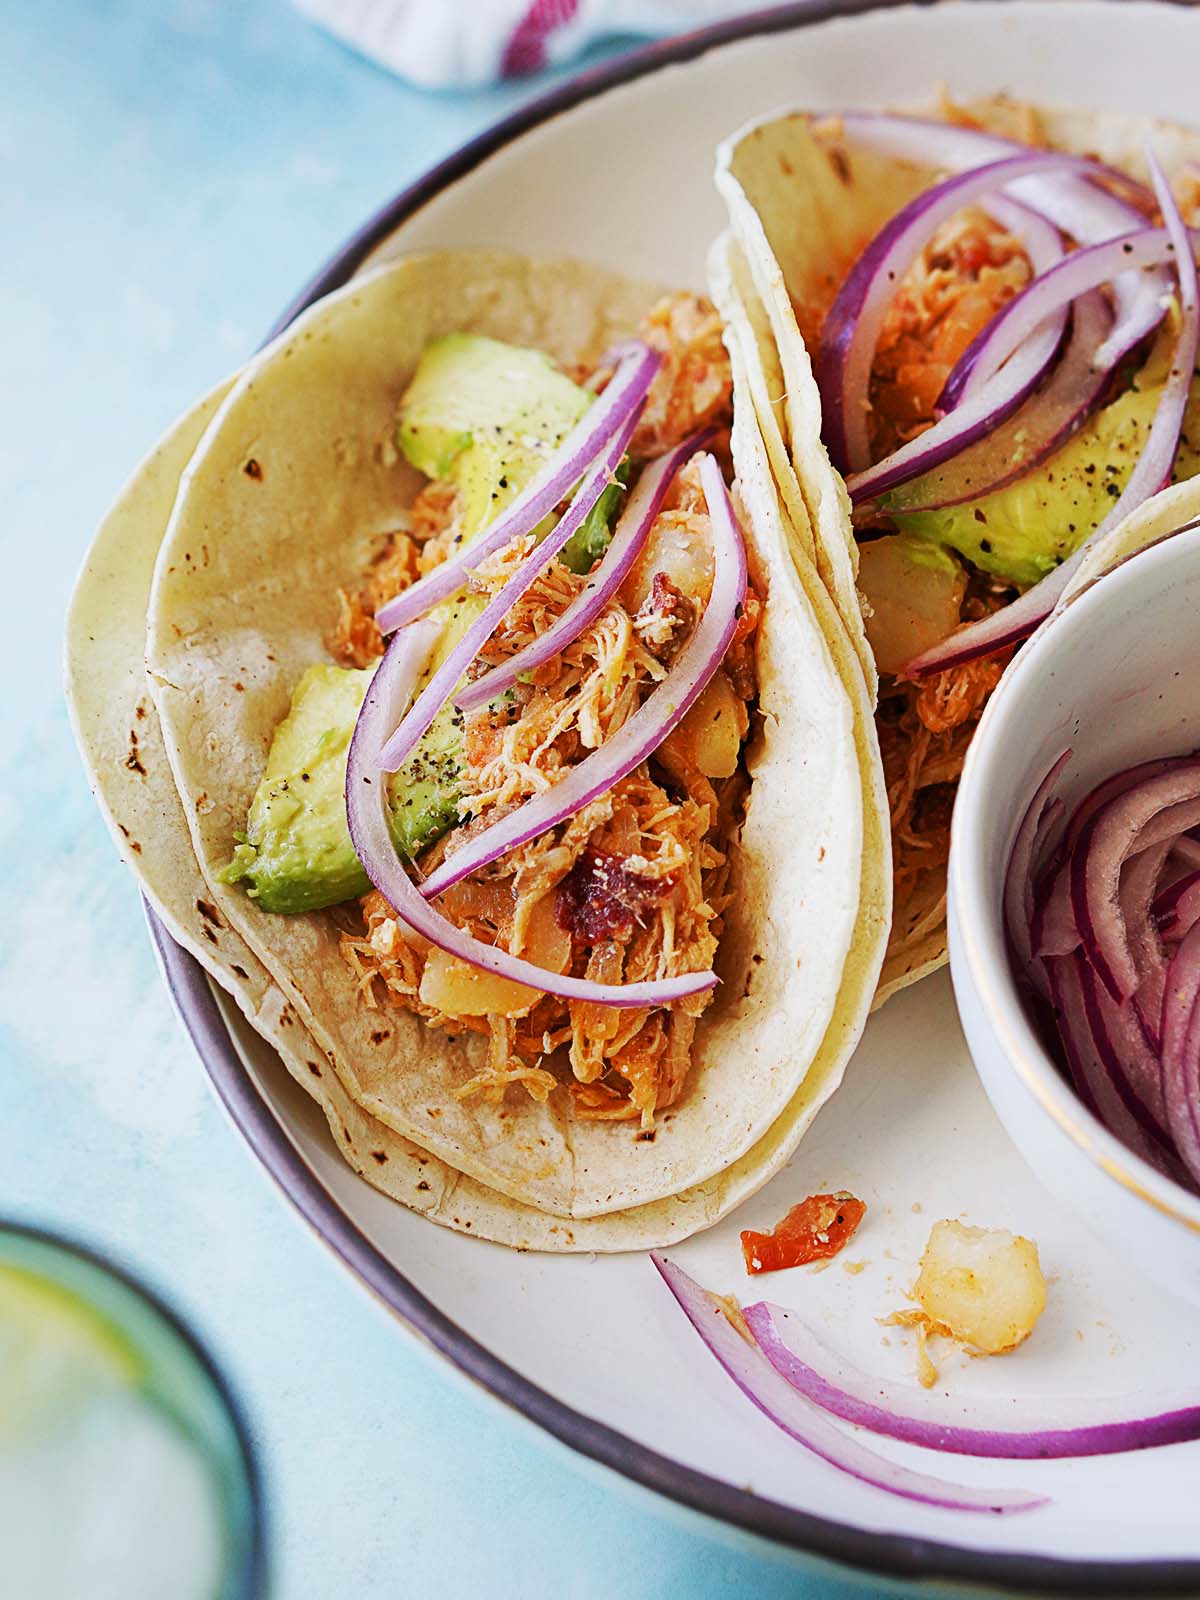 Two tinga tacos on a plate garnished with pickled onions.